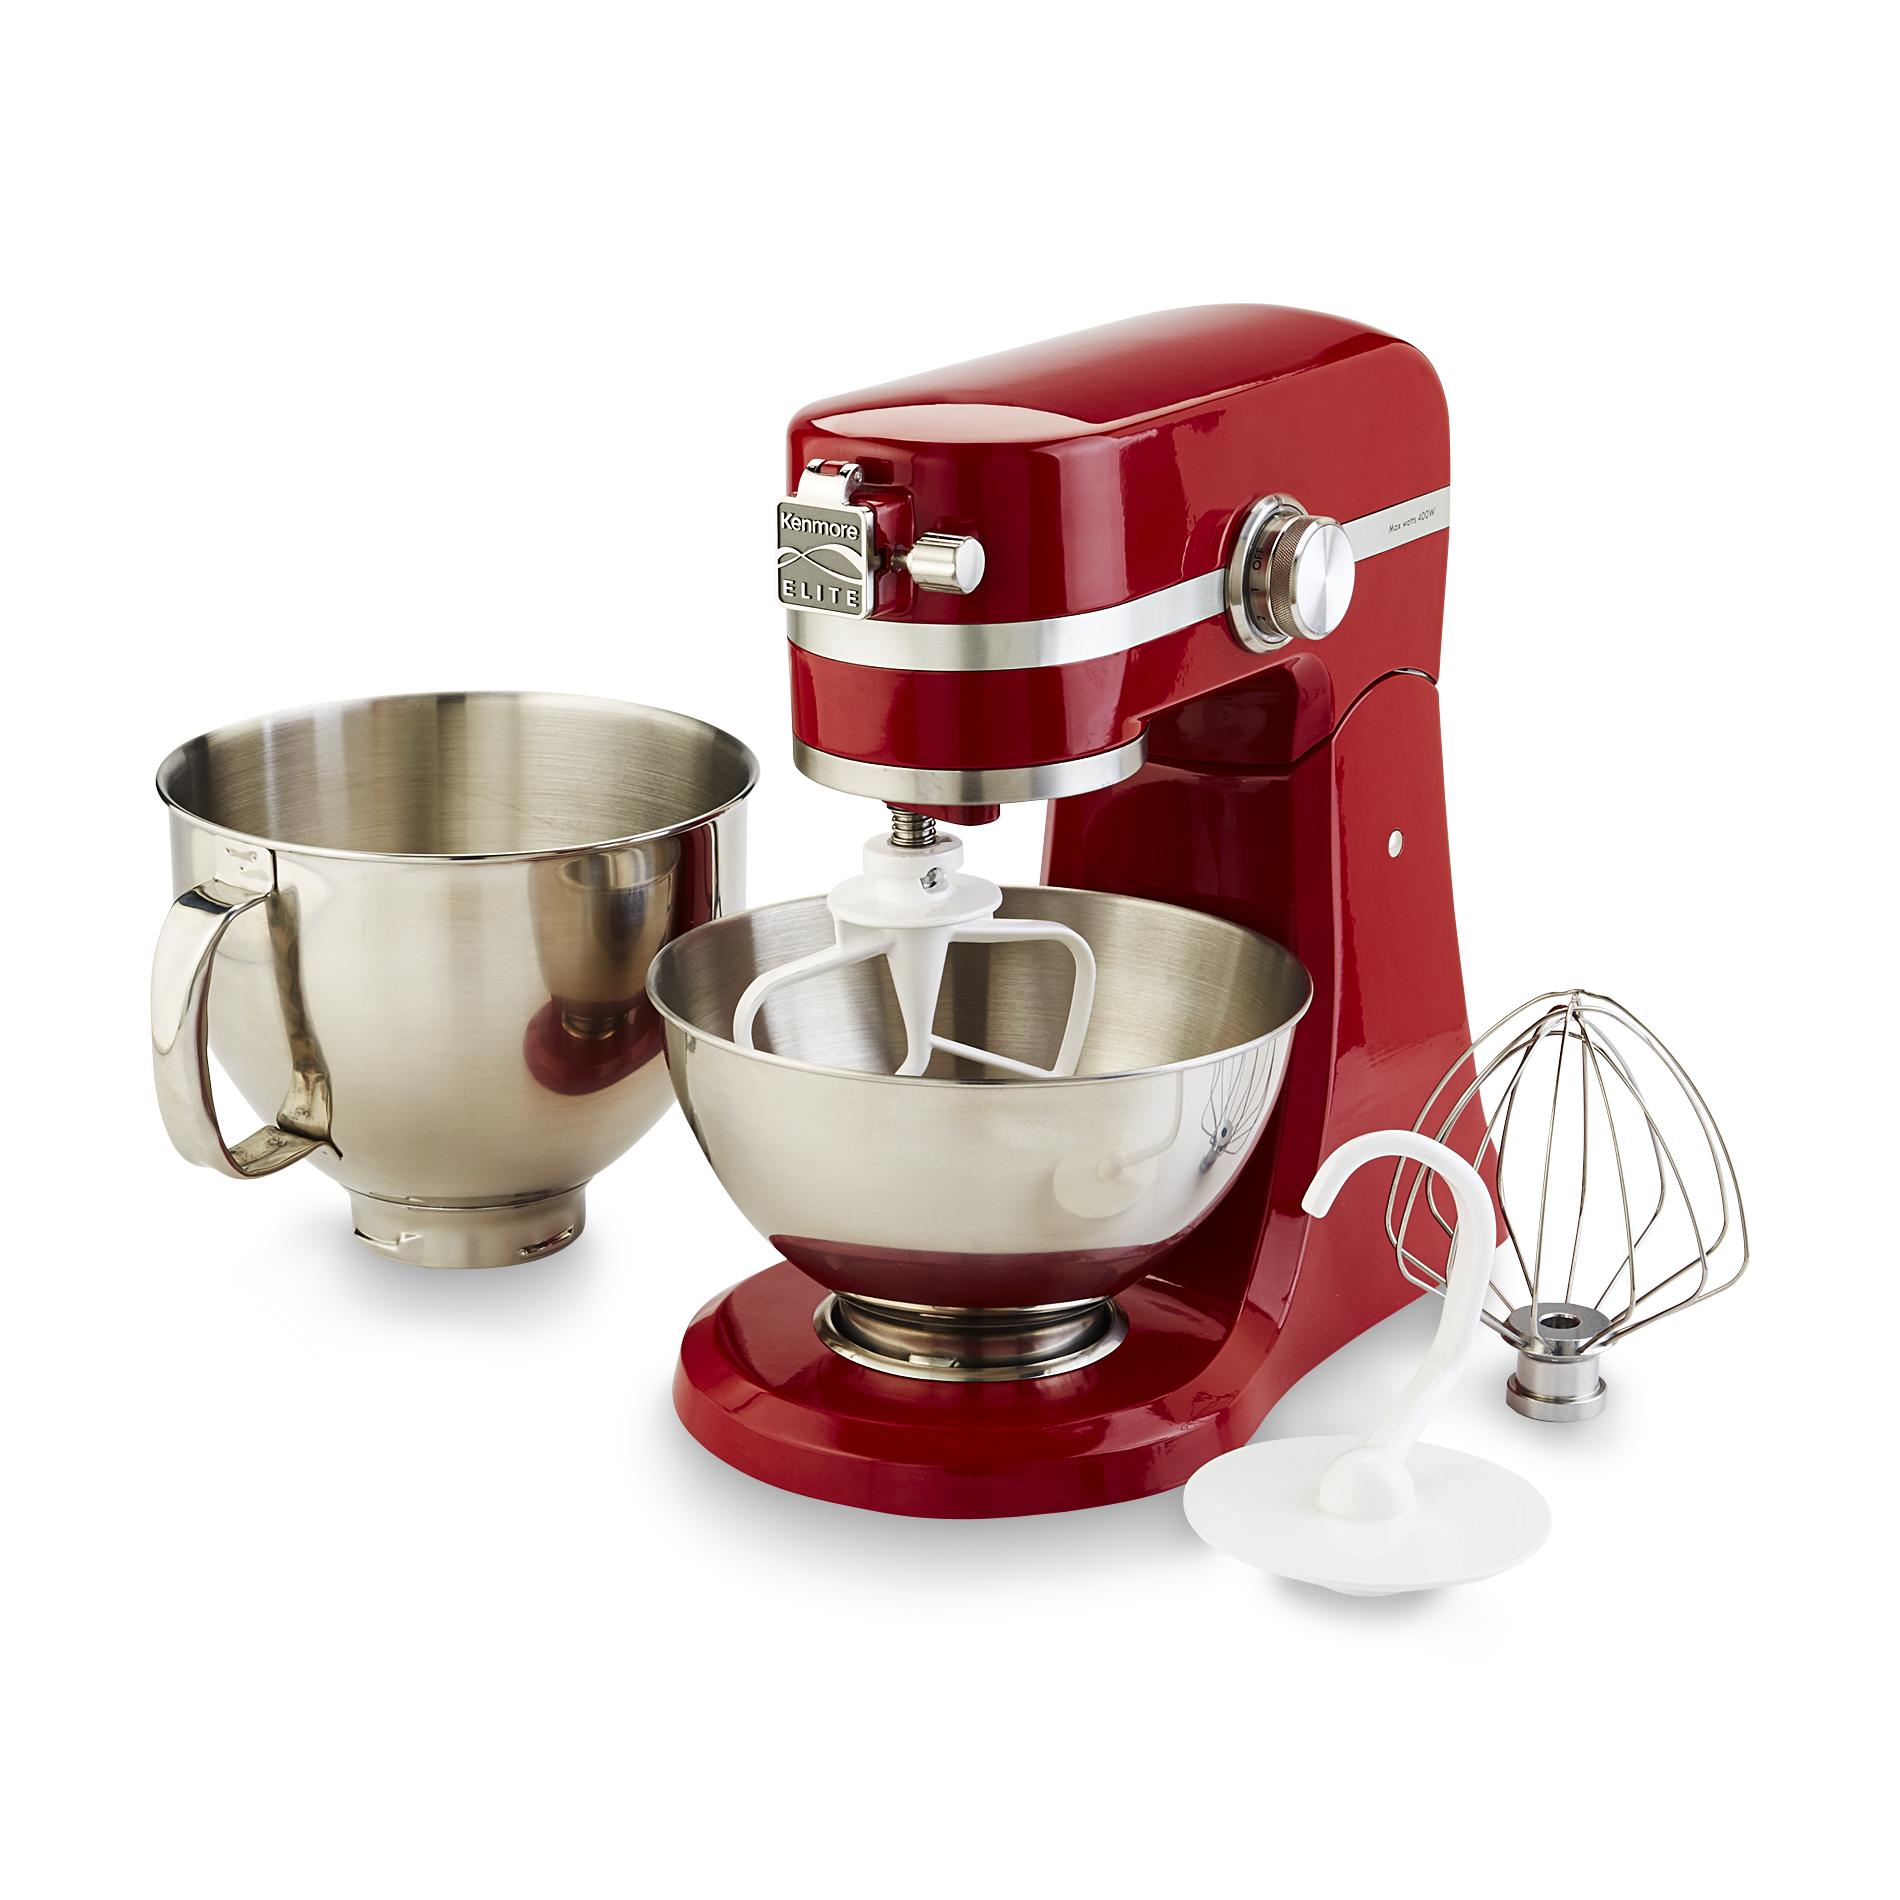 Official Kenmore elite stand mixer parts